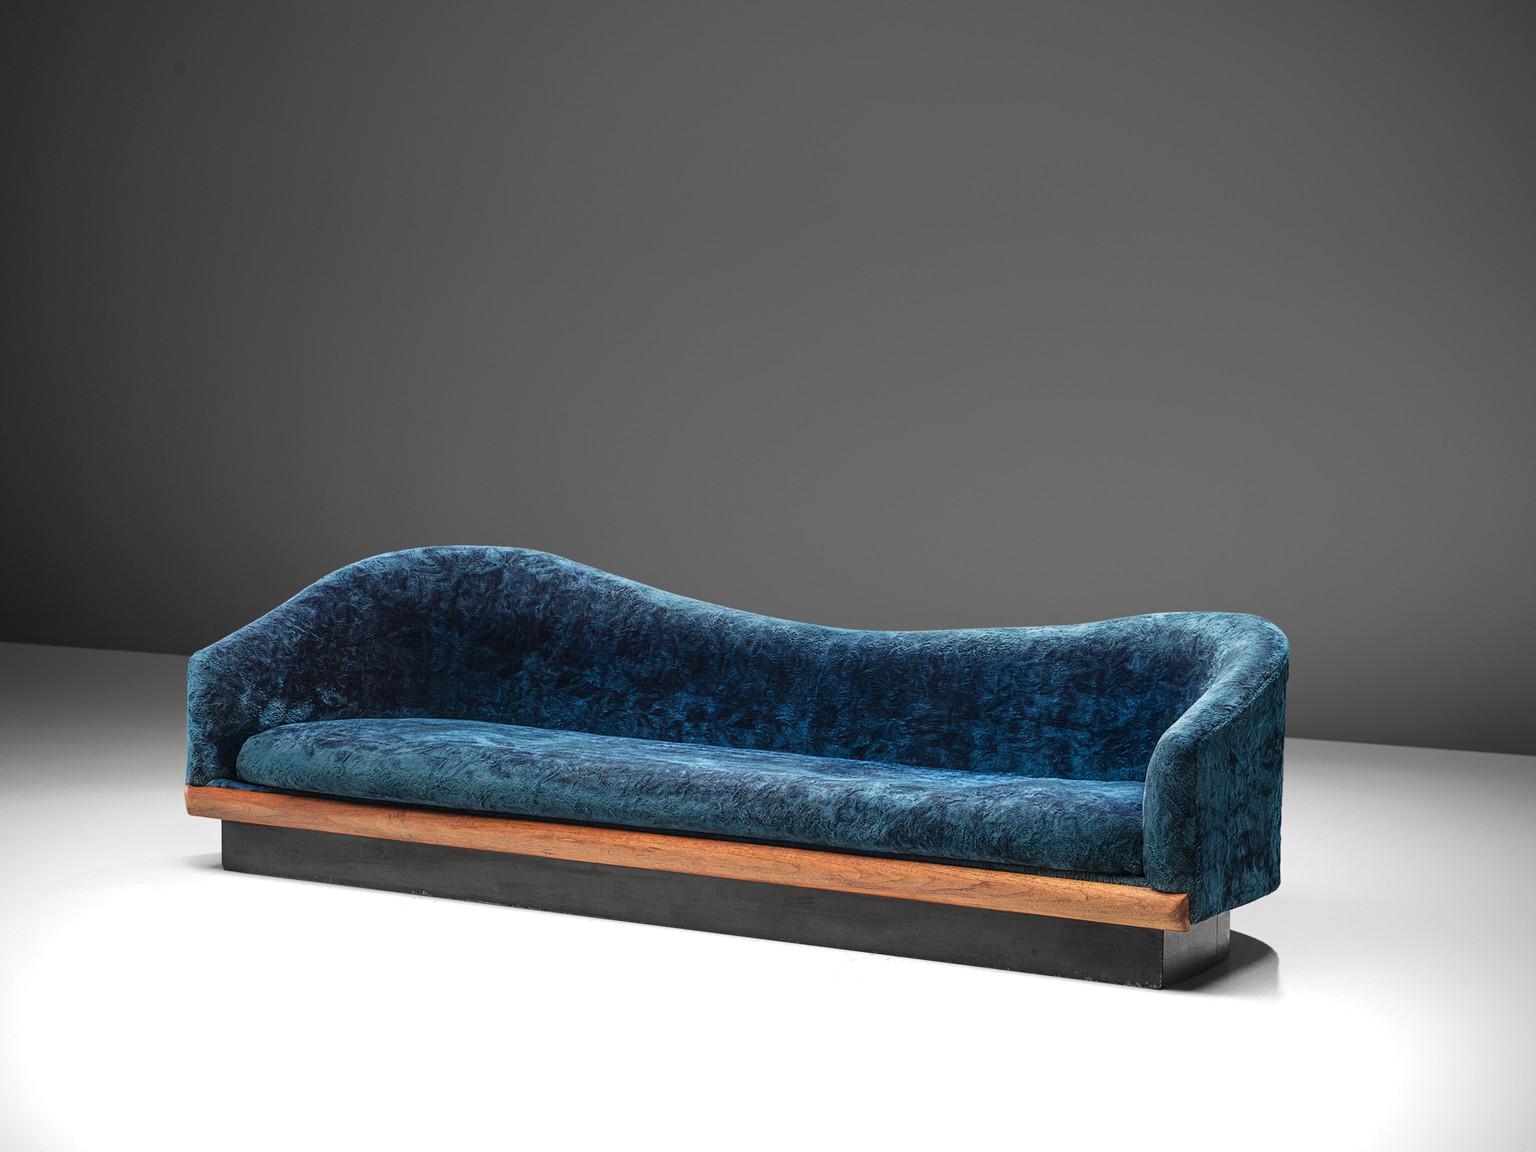 Adrian Pearsall, 'Cloud' sofa to be reupholstered, walnut and fabric, United States, 1970s

This beautifully shaped sofa designed by Adrian Pearsall is characterized by a solid construction, featuring clear lines and round edges. The sofa displays